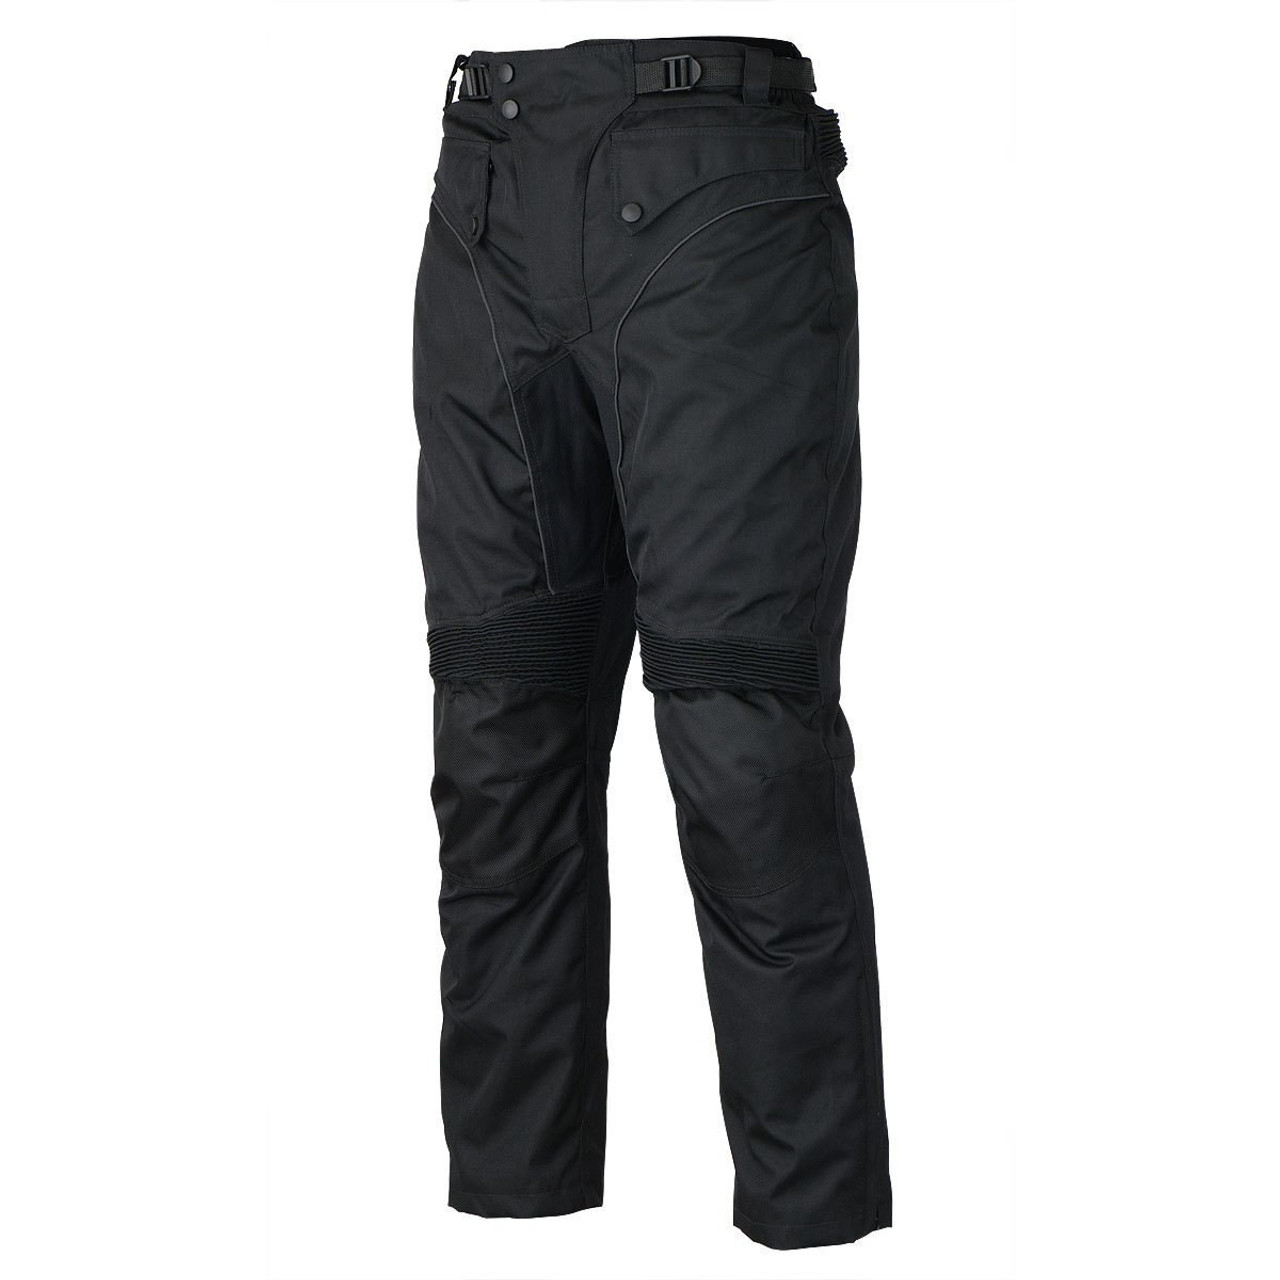 Recommendations for women's Kevlar pants? I can't find anything in